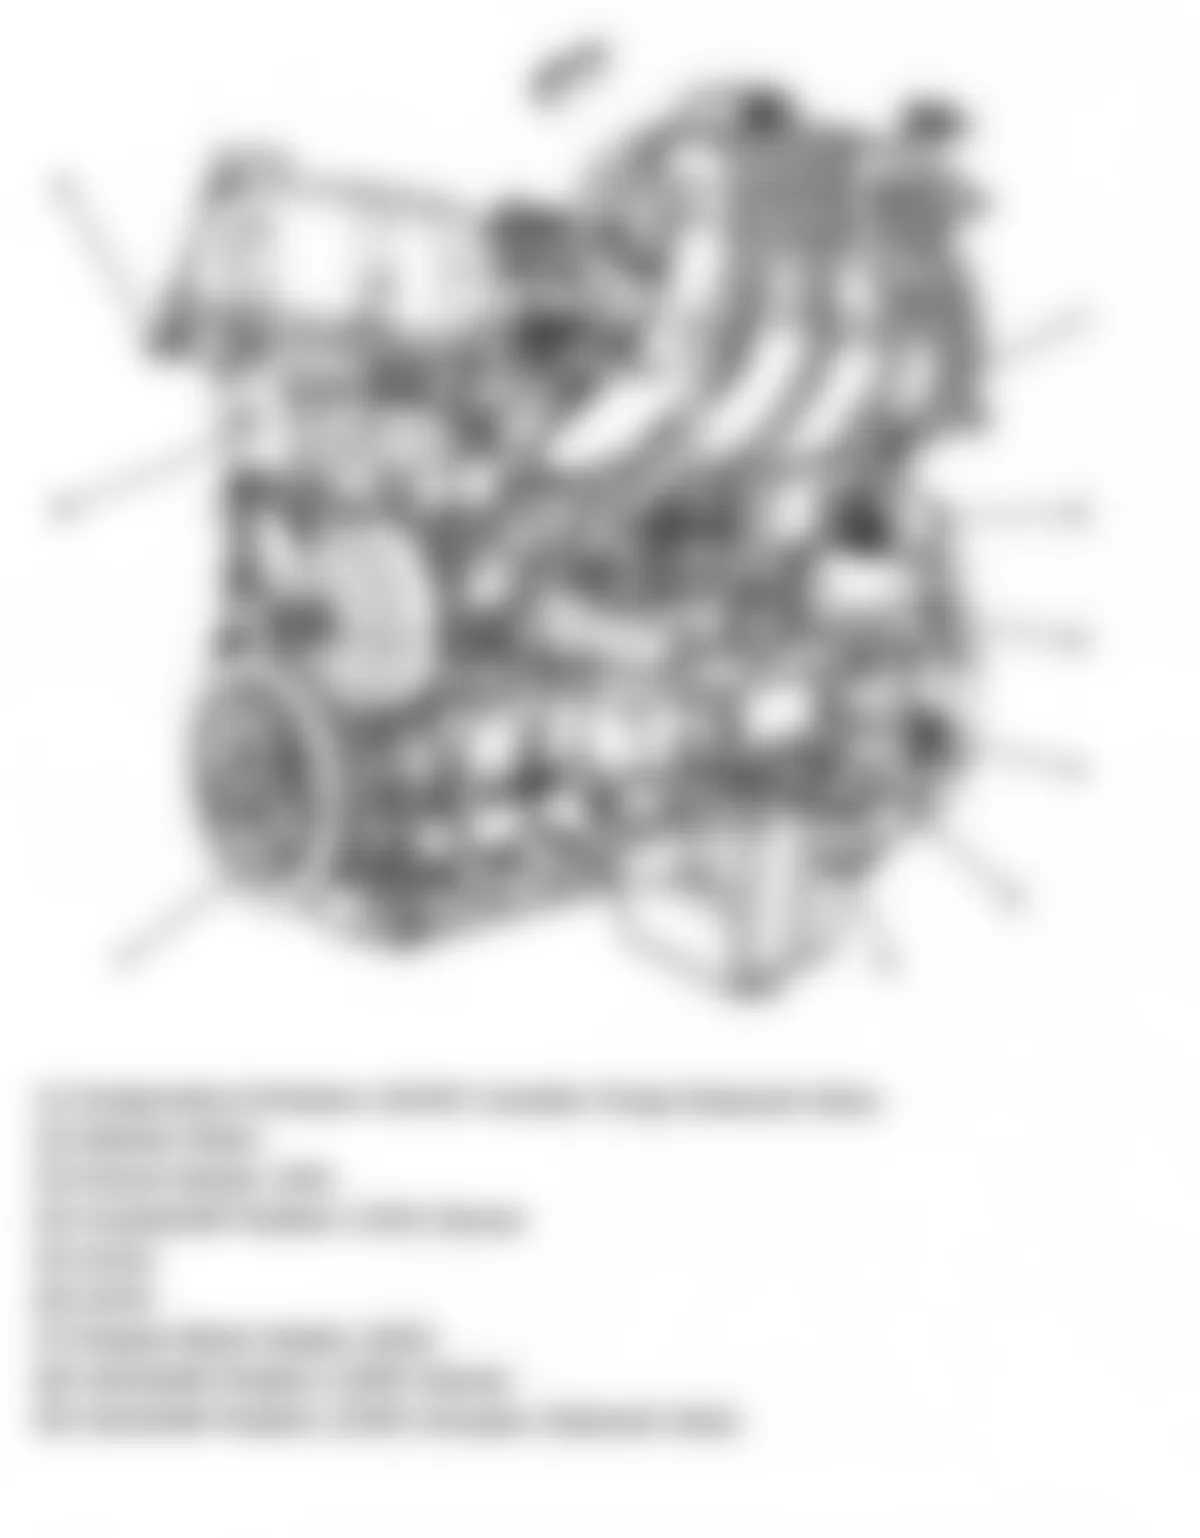 Hummer H3T Alpha 2009 - Component Locations -  Front Of Engine (3.7L)